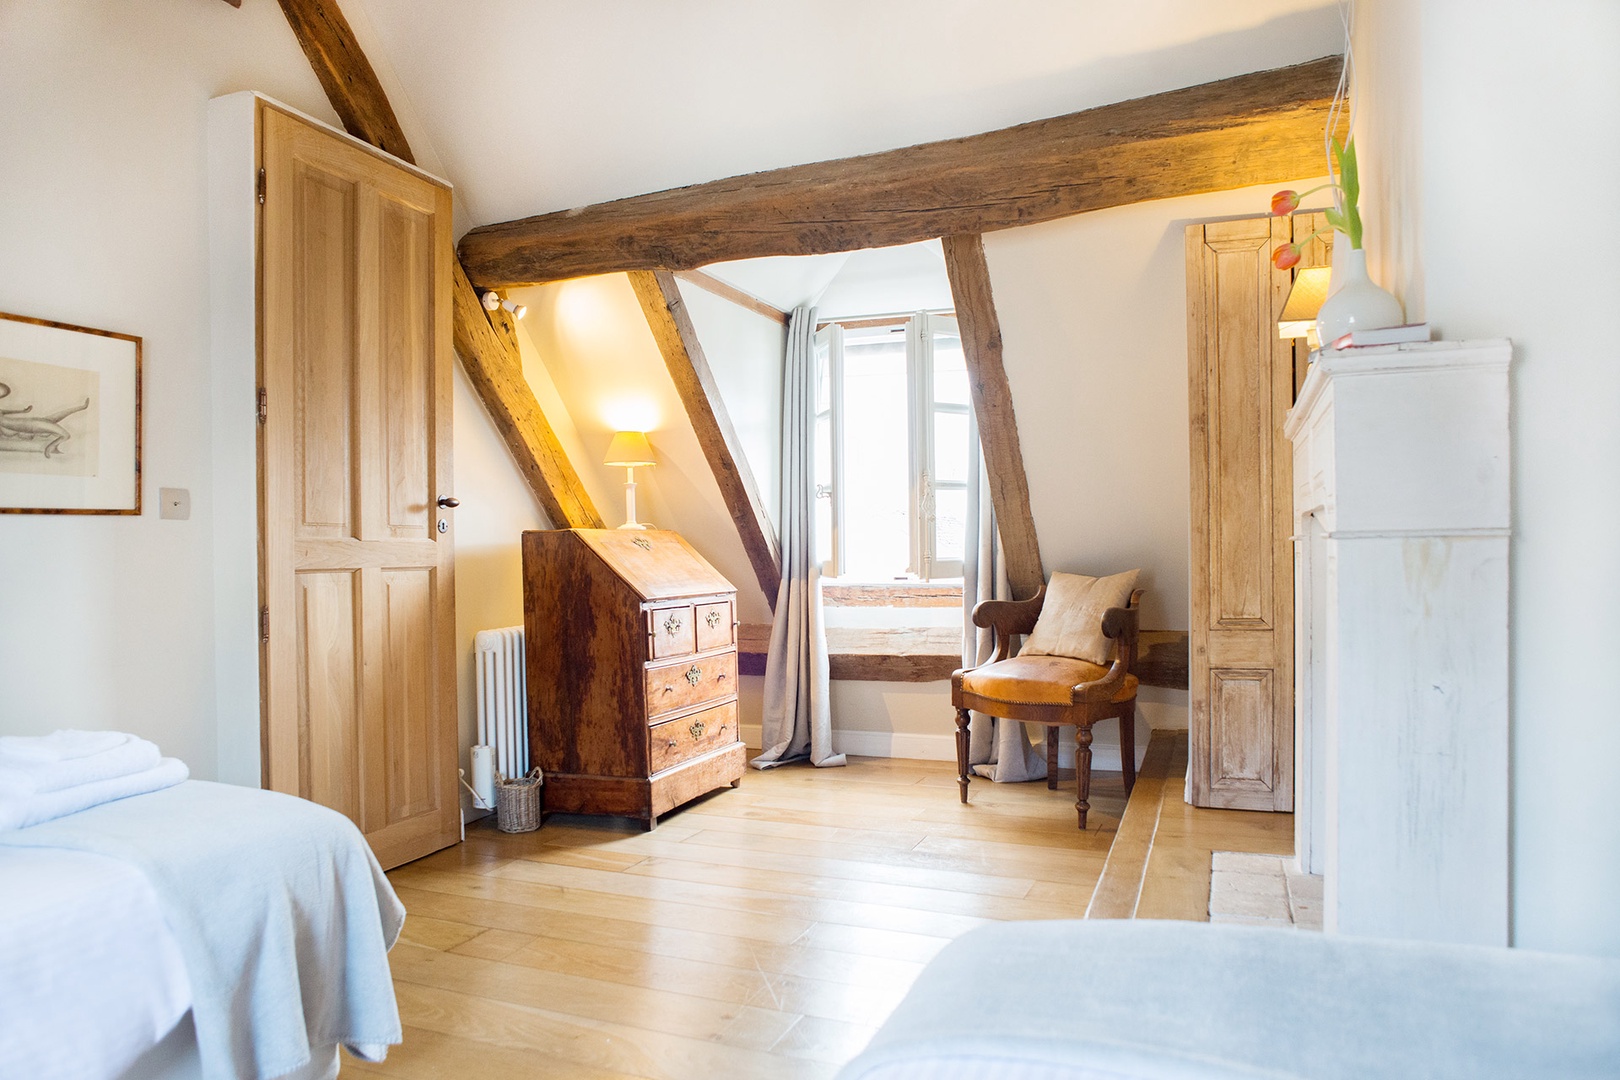 The oak beams and slanting ceiling continue in bedroom 2.